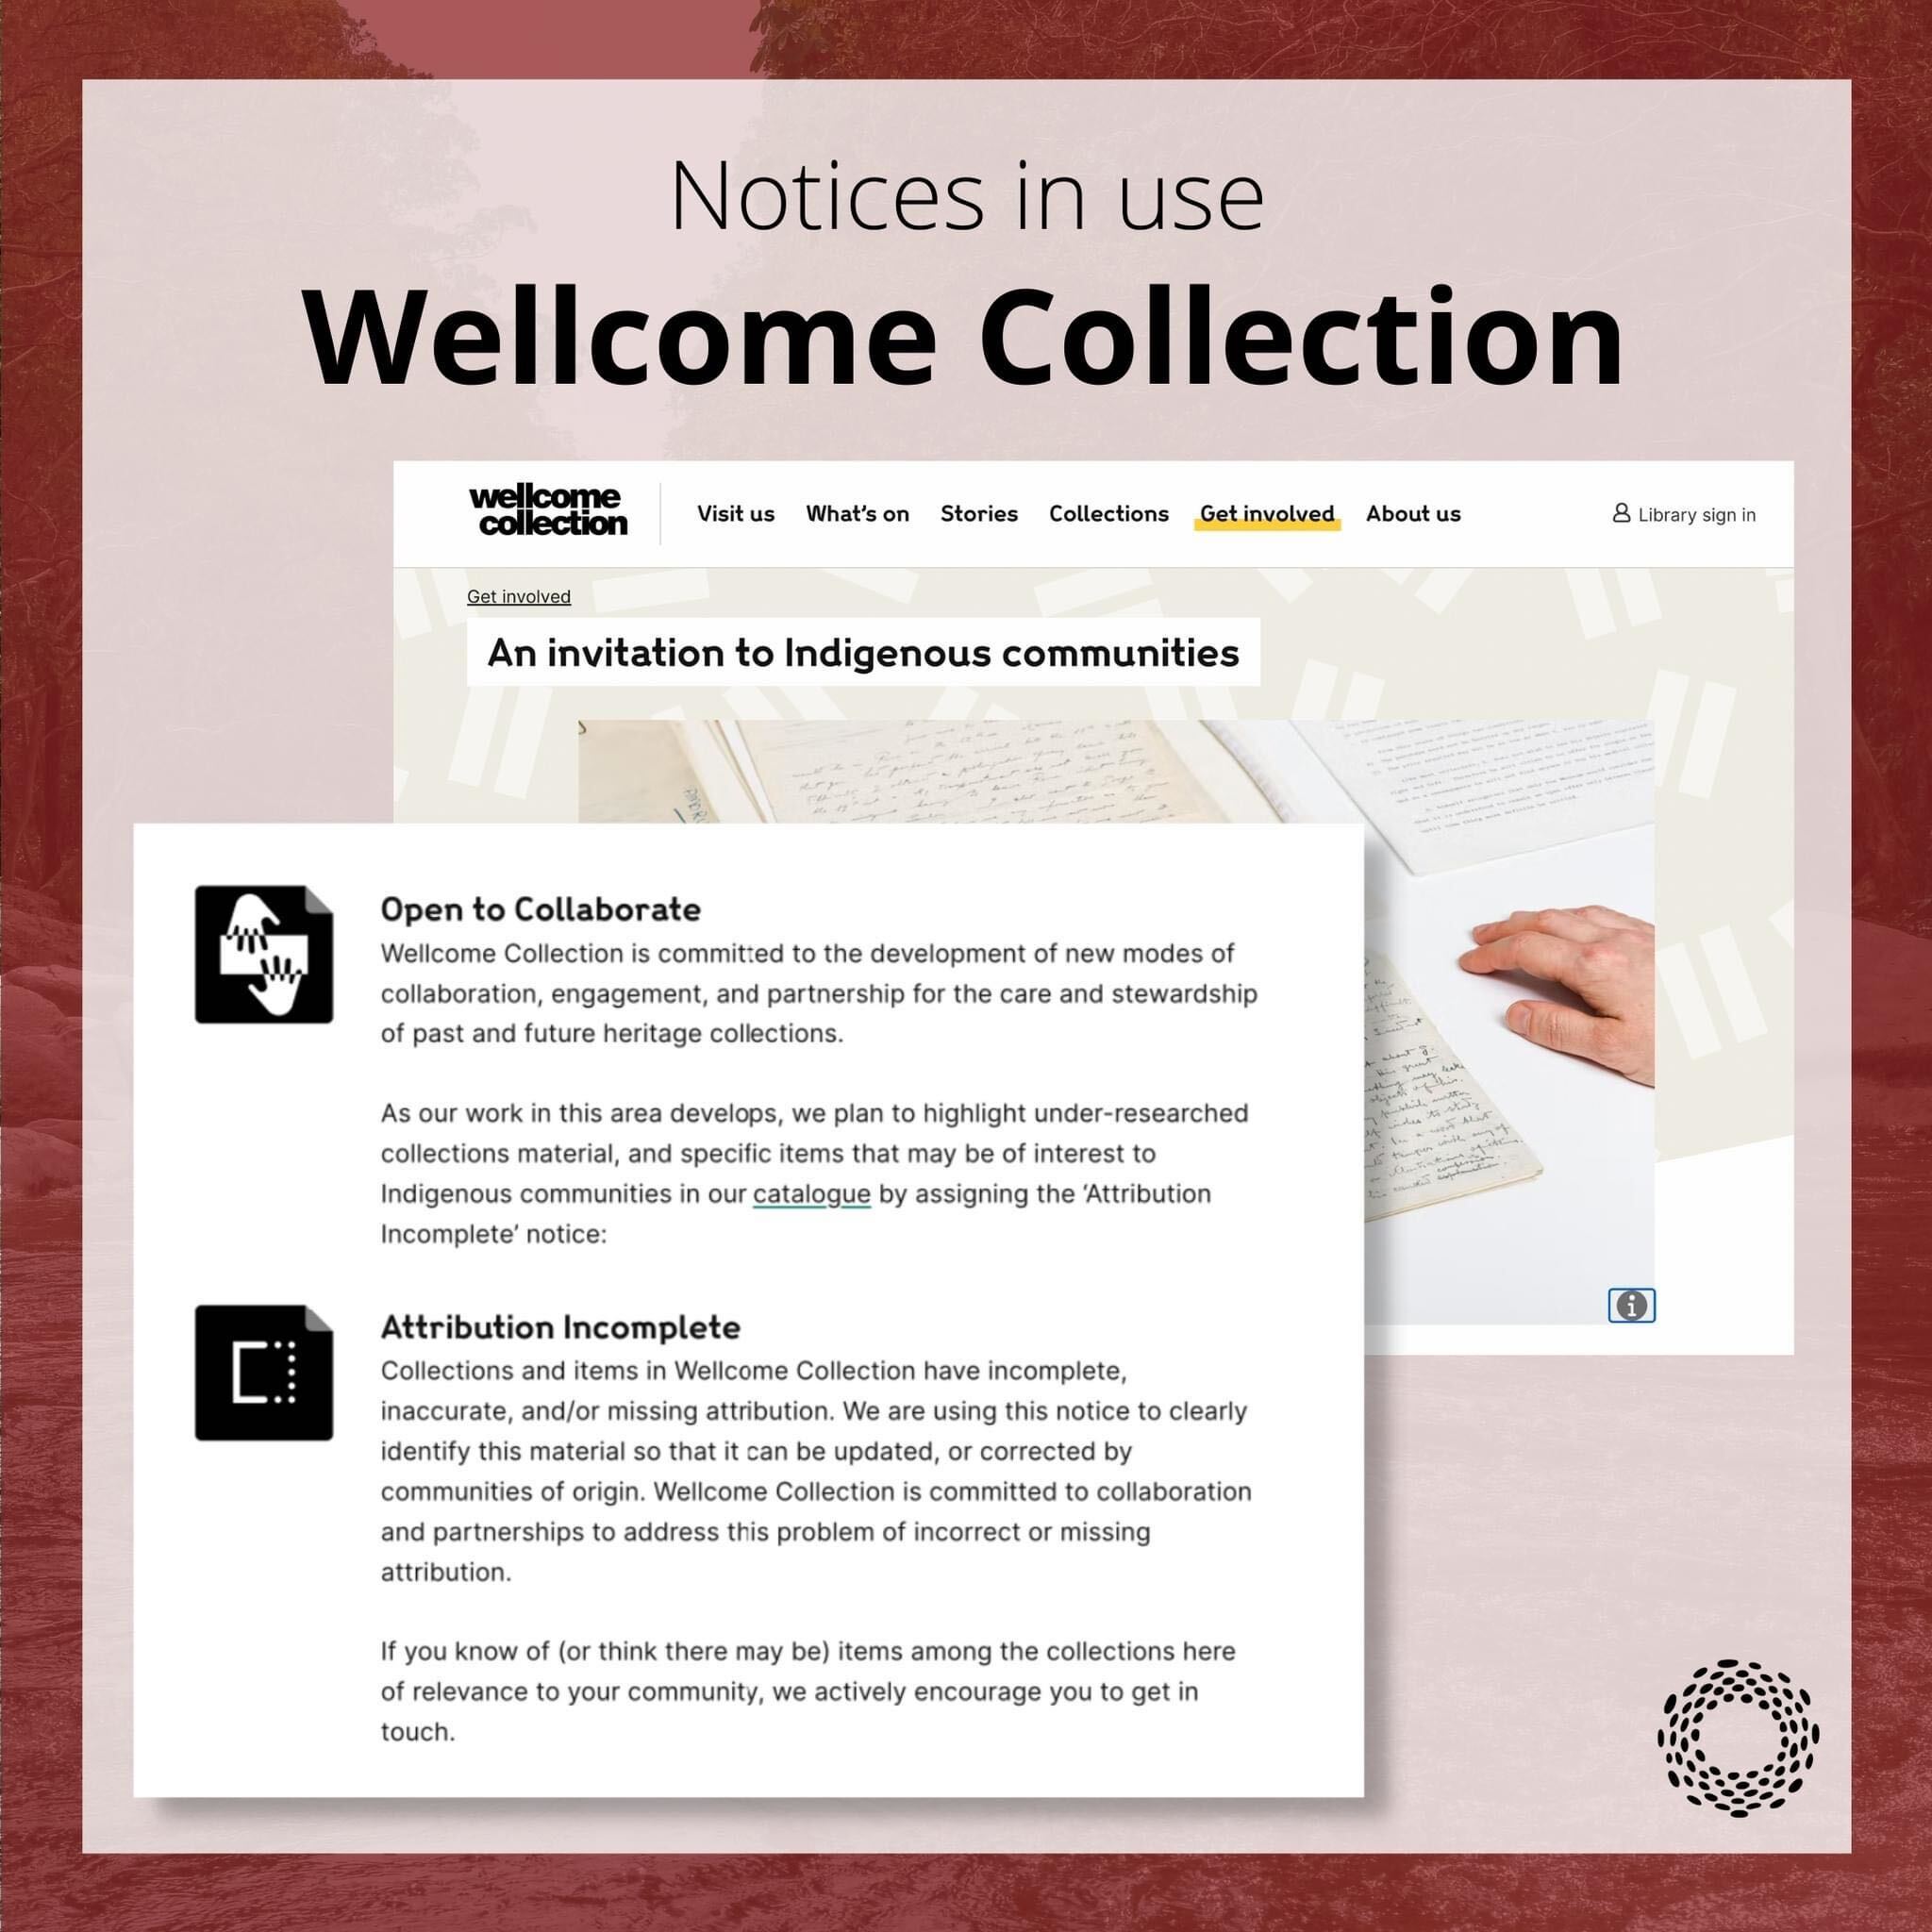 On a decorative red background, text: “Notices in use. Wellcome Collection.” Two screenshots from the Wellcome Collection website. The first shows a title, “An invitation to Indigenous communities.” The second shows text with two Notices applied, Open to Collaborate and Attribution Incomplete.